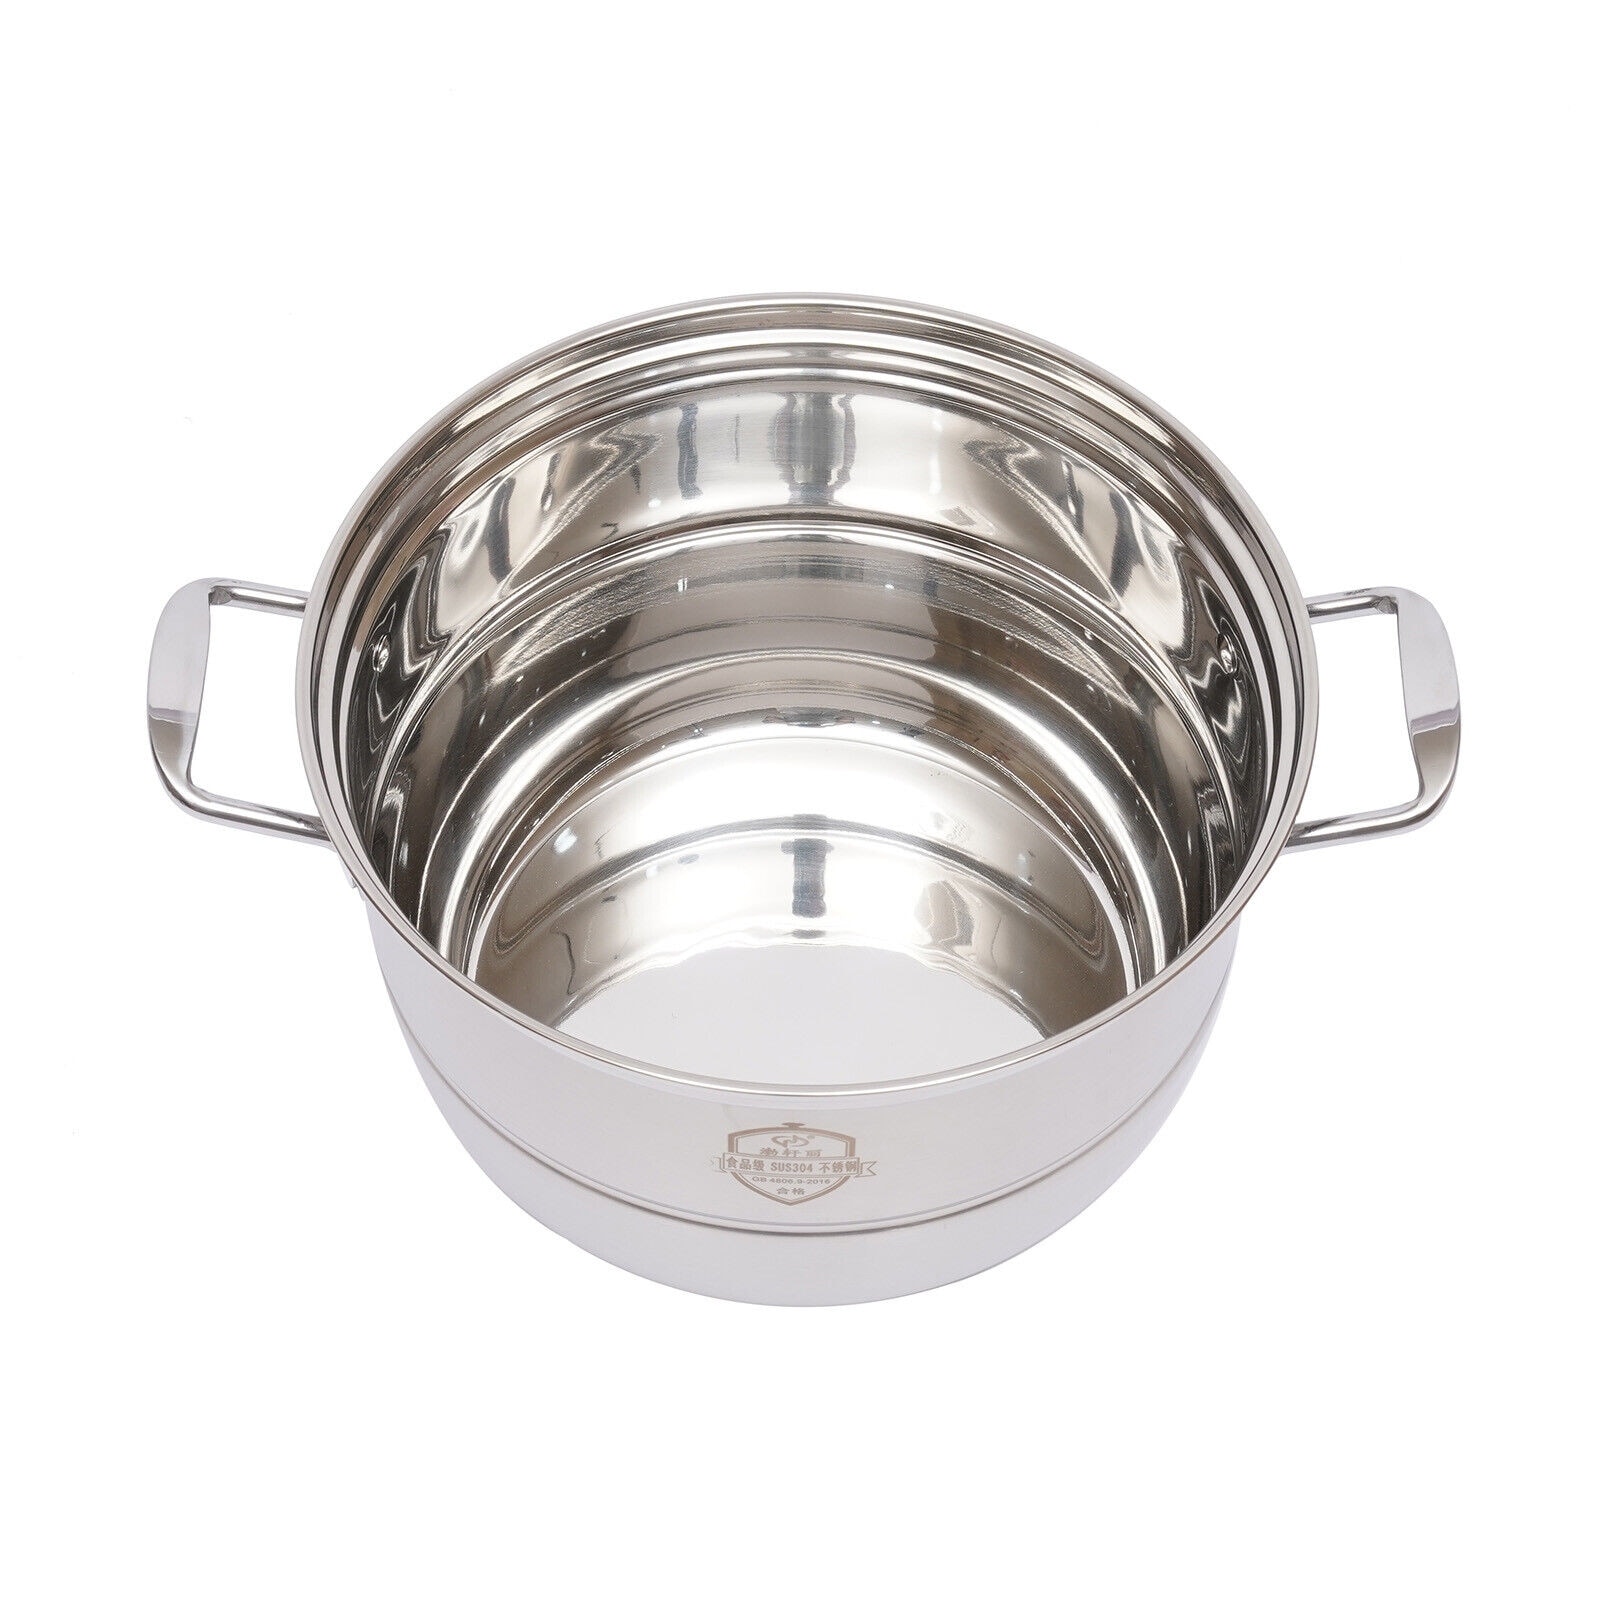 https://ak1.ostkcdn.com/images/products/is/images/direct/d79b2c19d56667acfd28e496db25bf7f51c25a75/5-Tier-Stainless-Steel-Steamer-Pot-Set.jpg